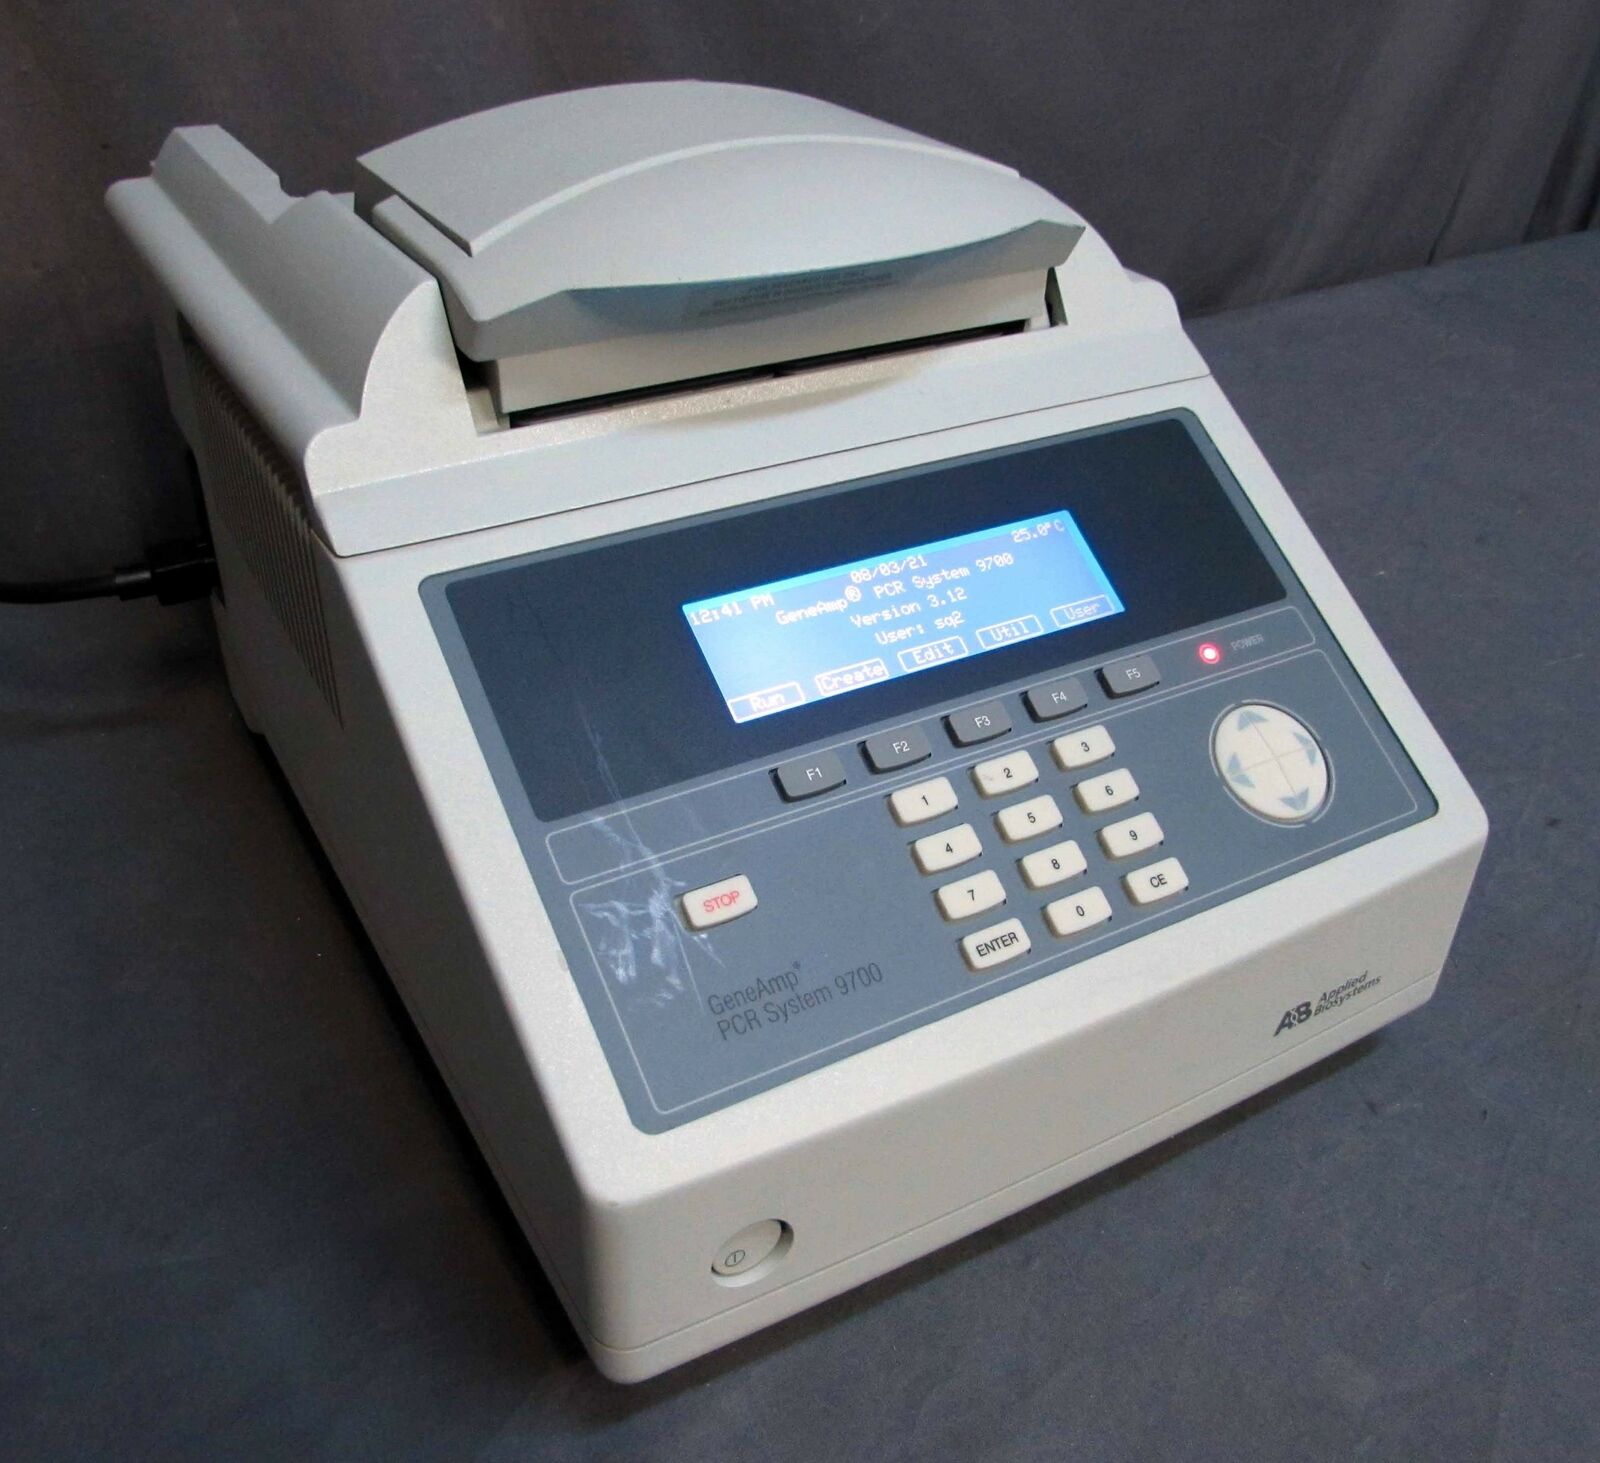 Tested Applied Biosystems Geneamp 9700 Dual 96-well Thermal Cycler